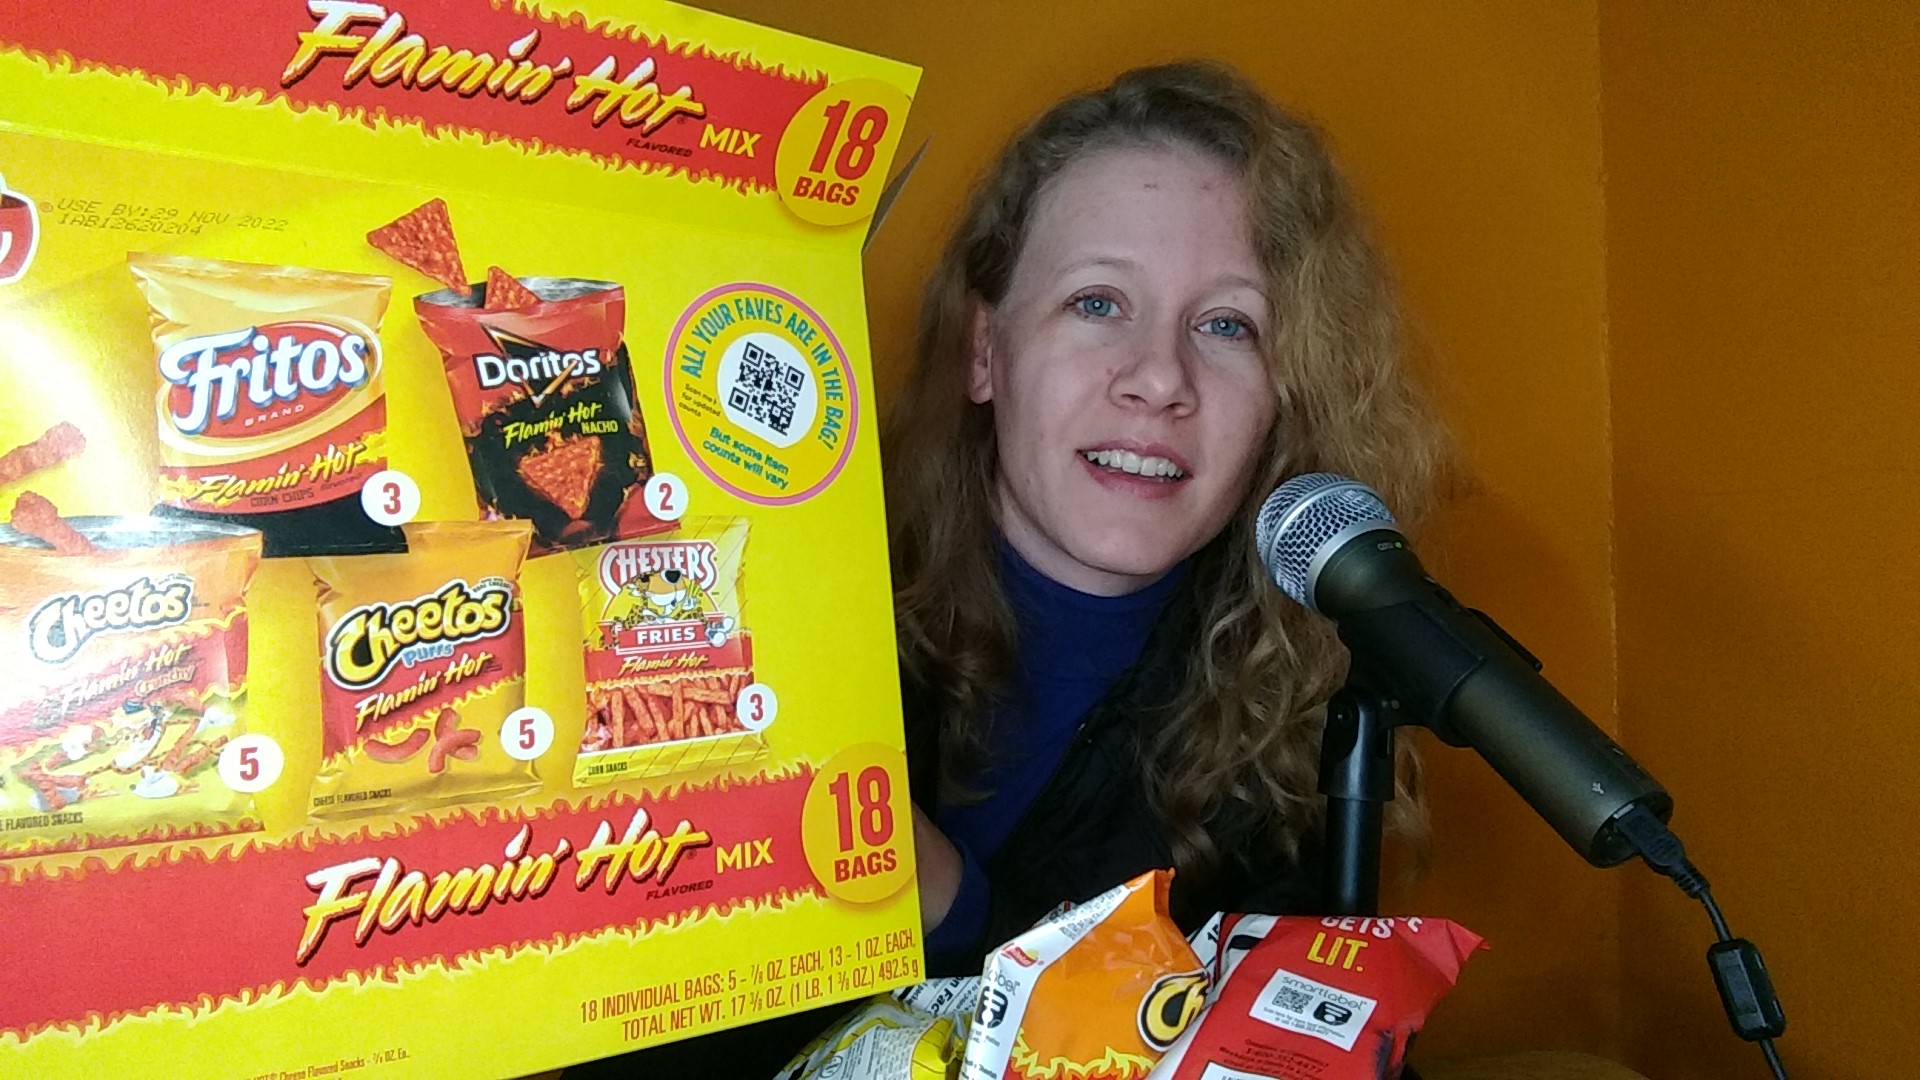 Me, Katie Patton, smiling while holding a box of Flamin' Hot Chips